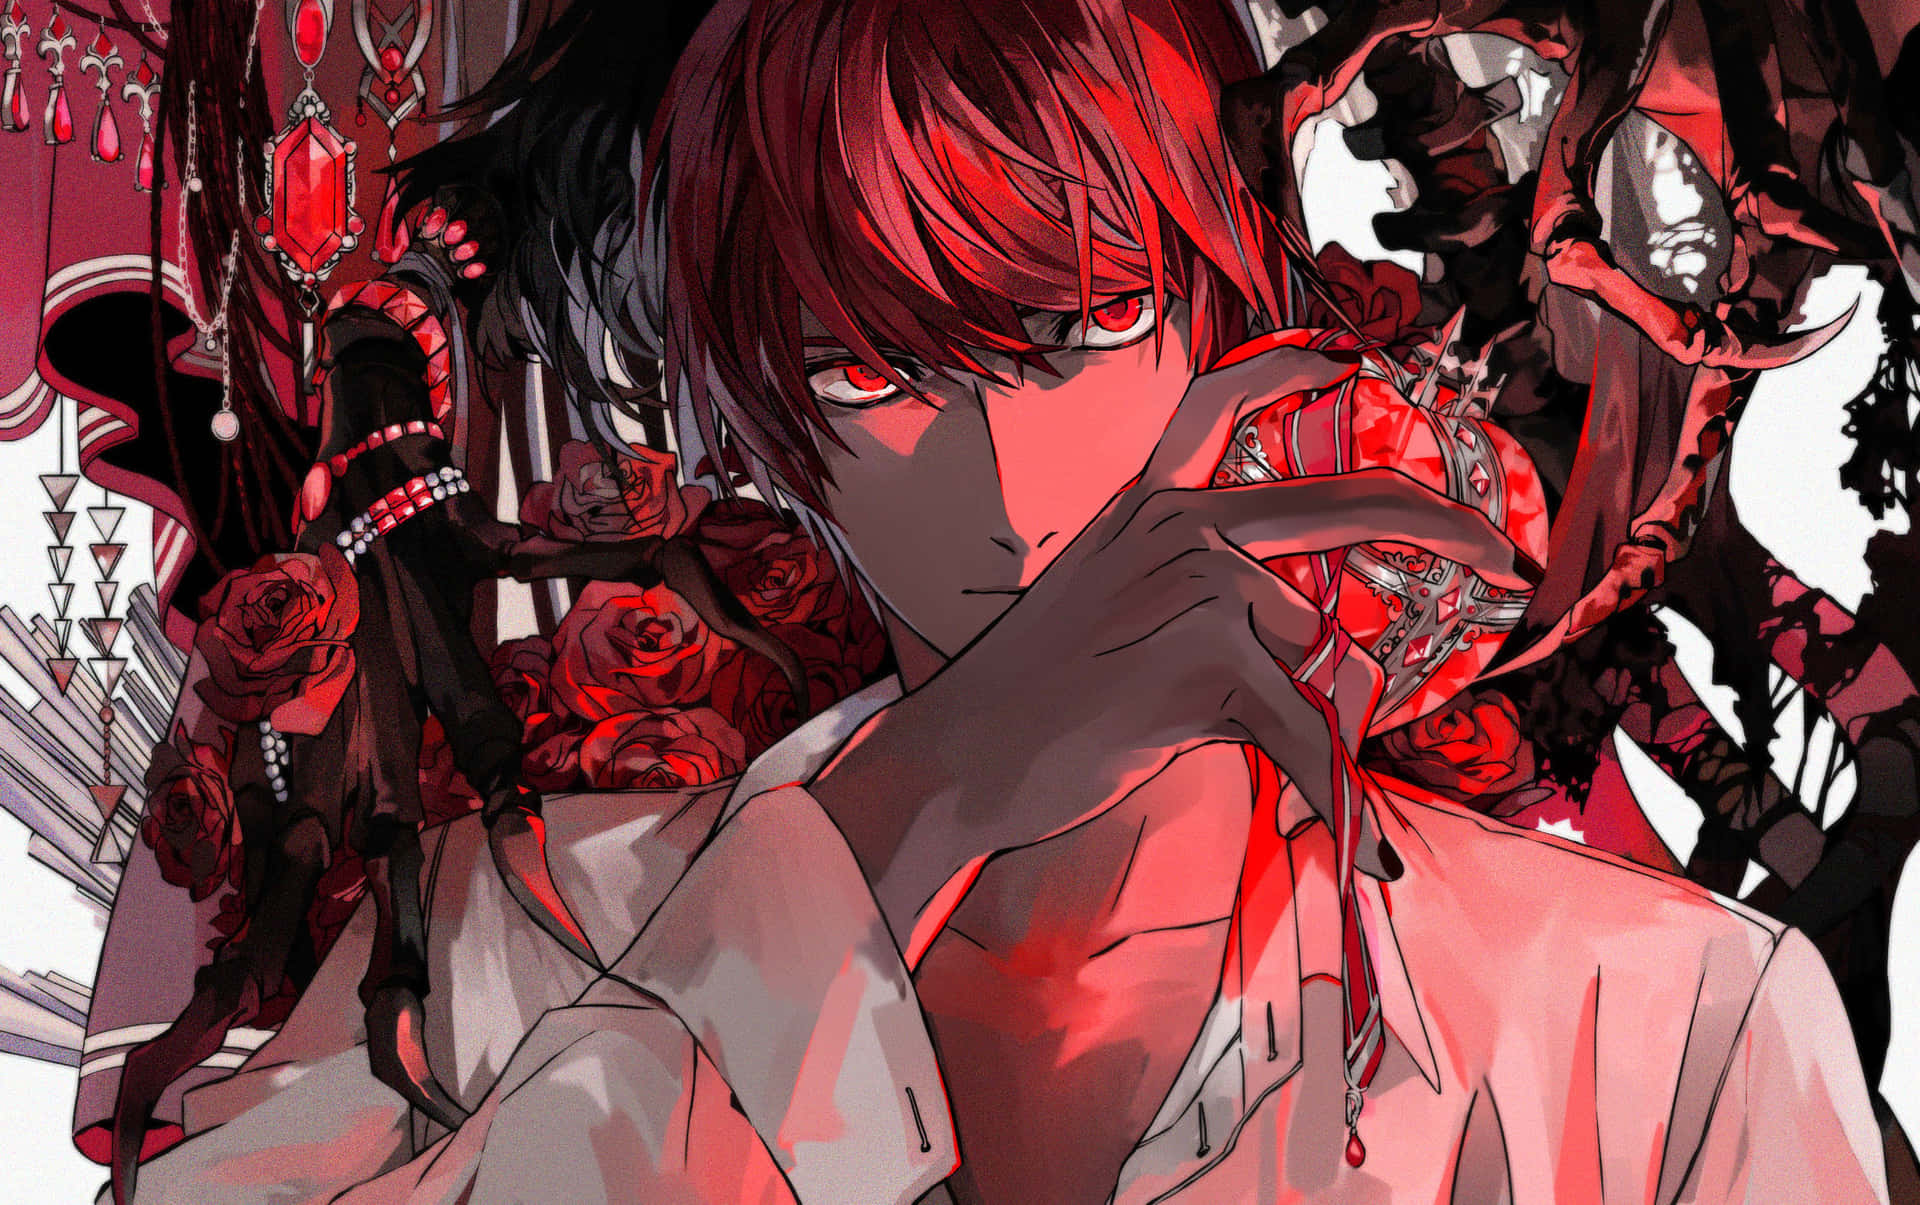 Pin by Kai on art | Death note, Light yagami, Anime girl base